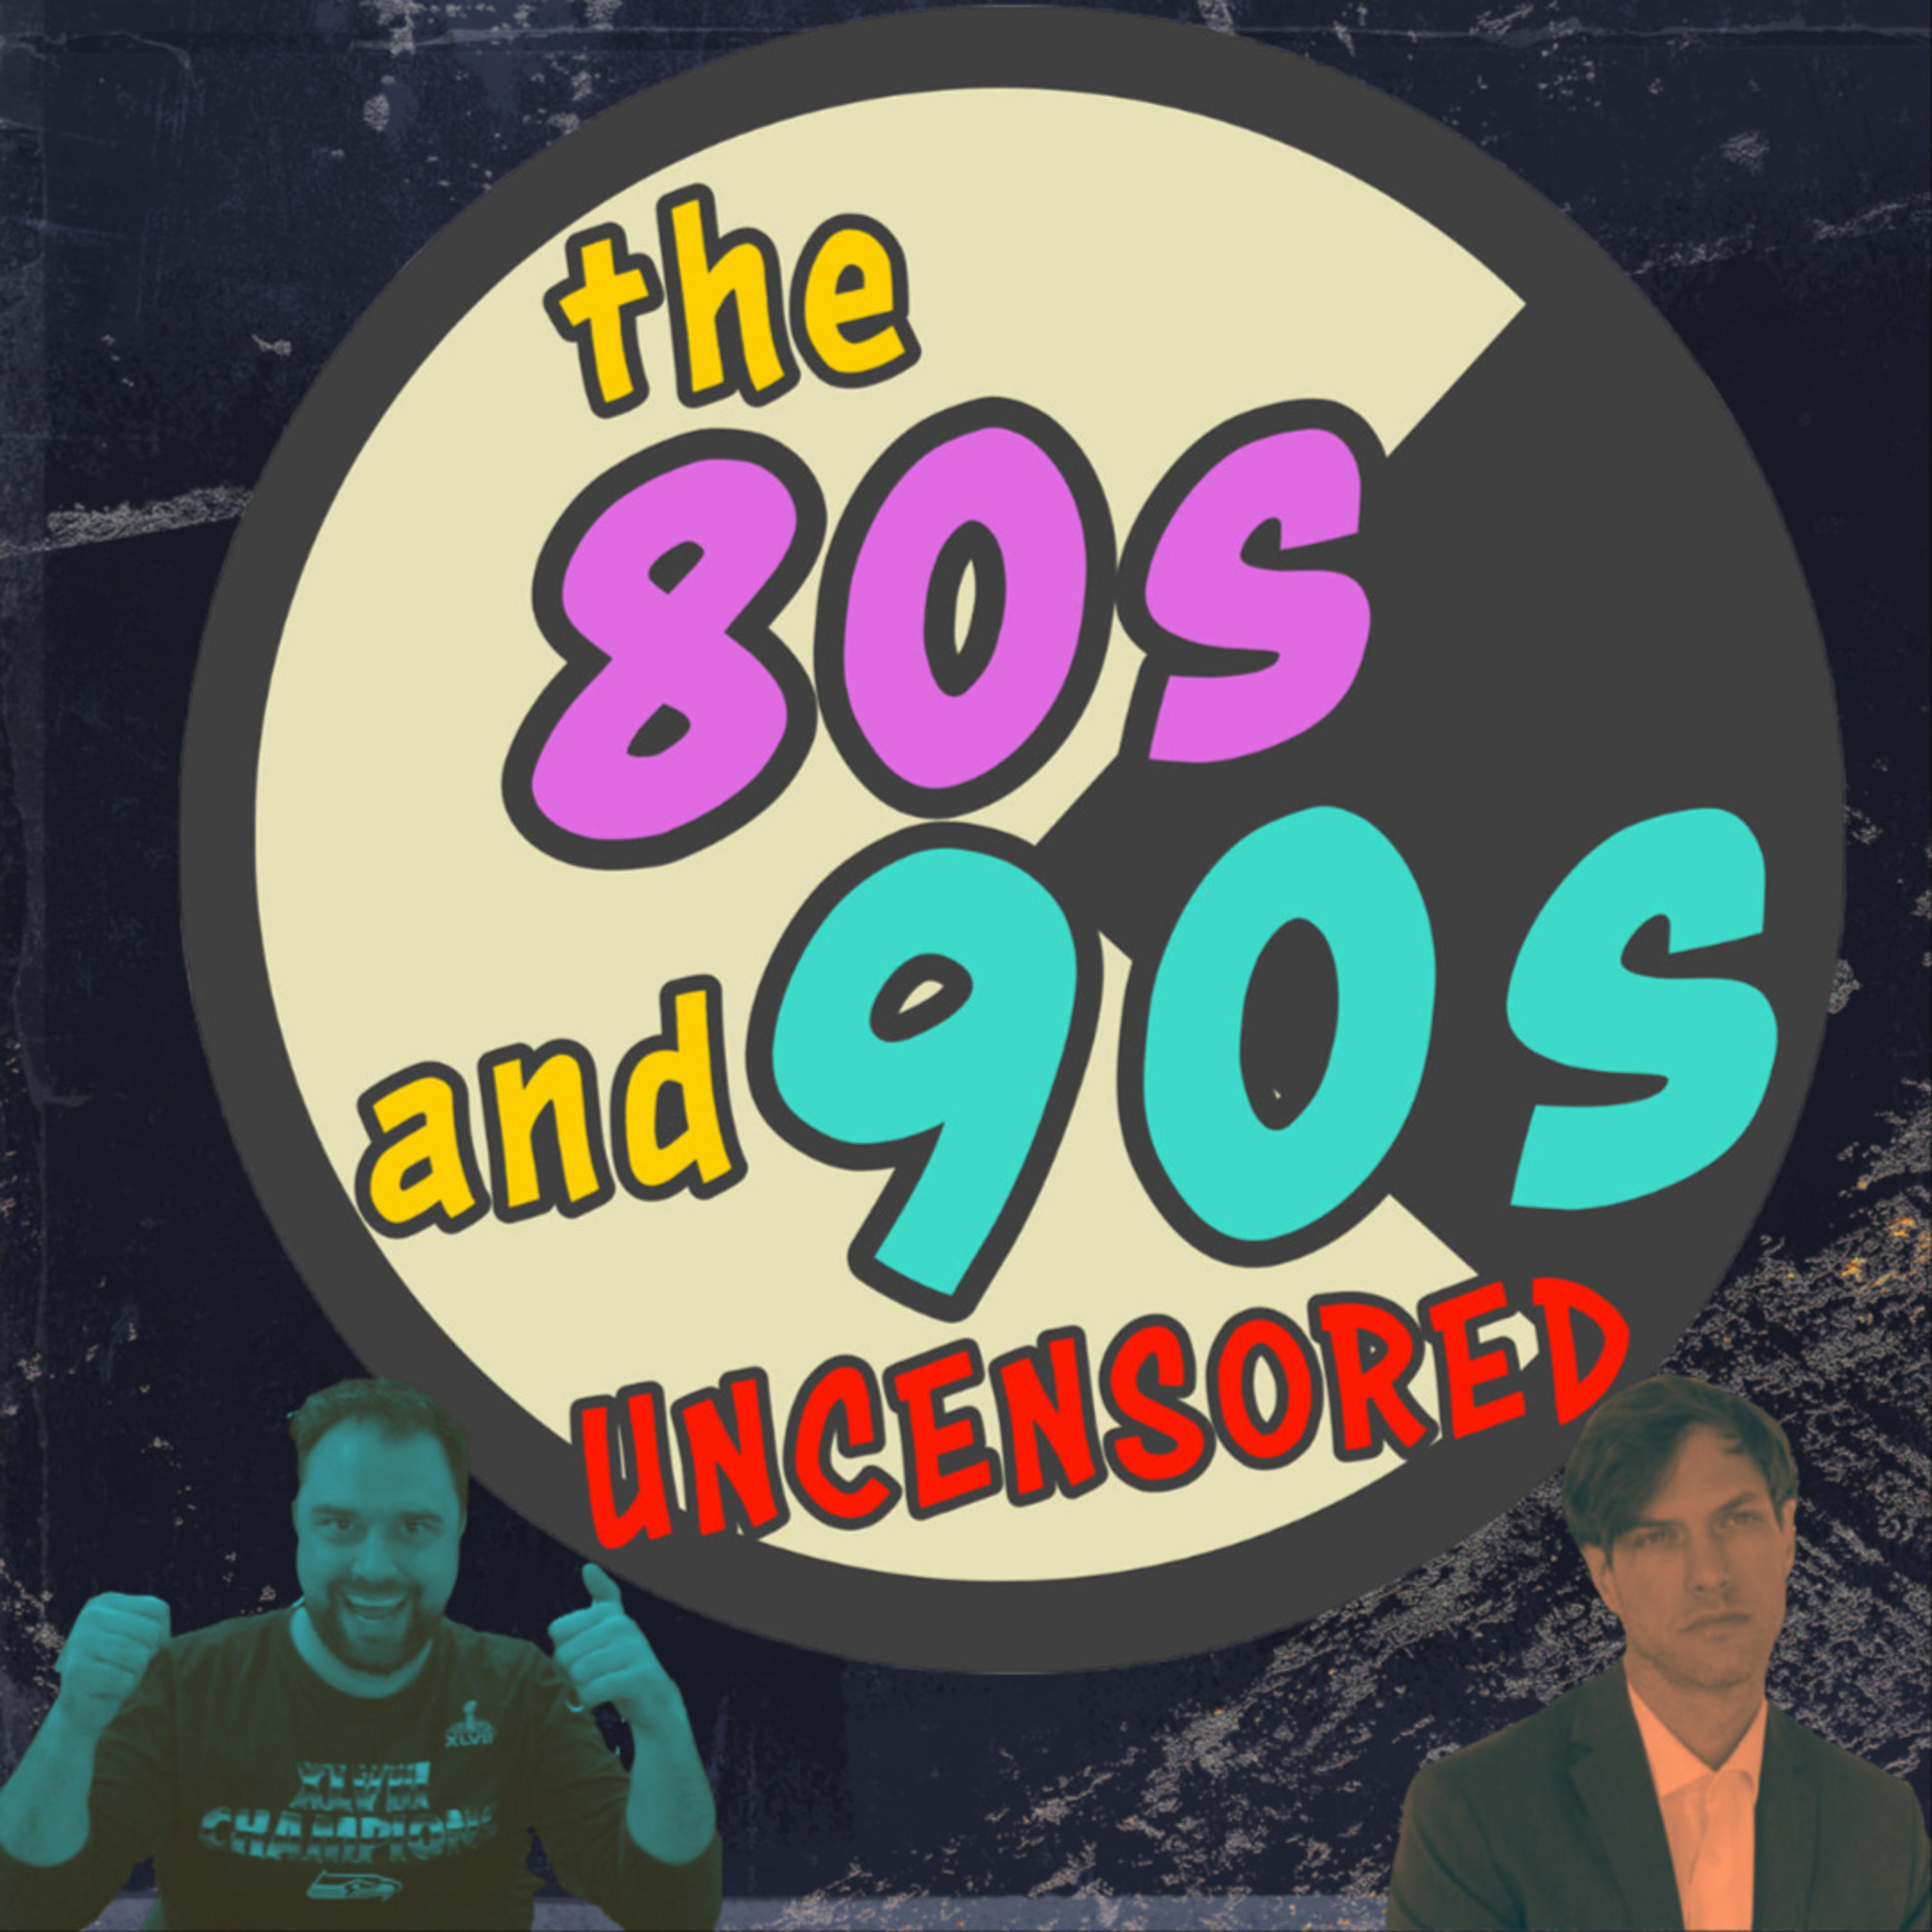 The 80s and 90s Uncensored